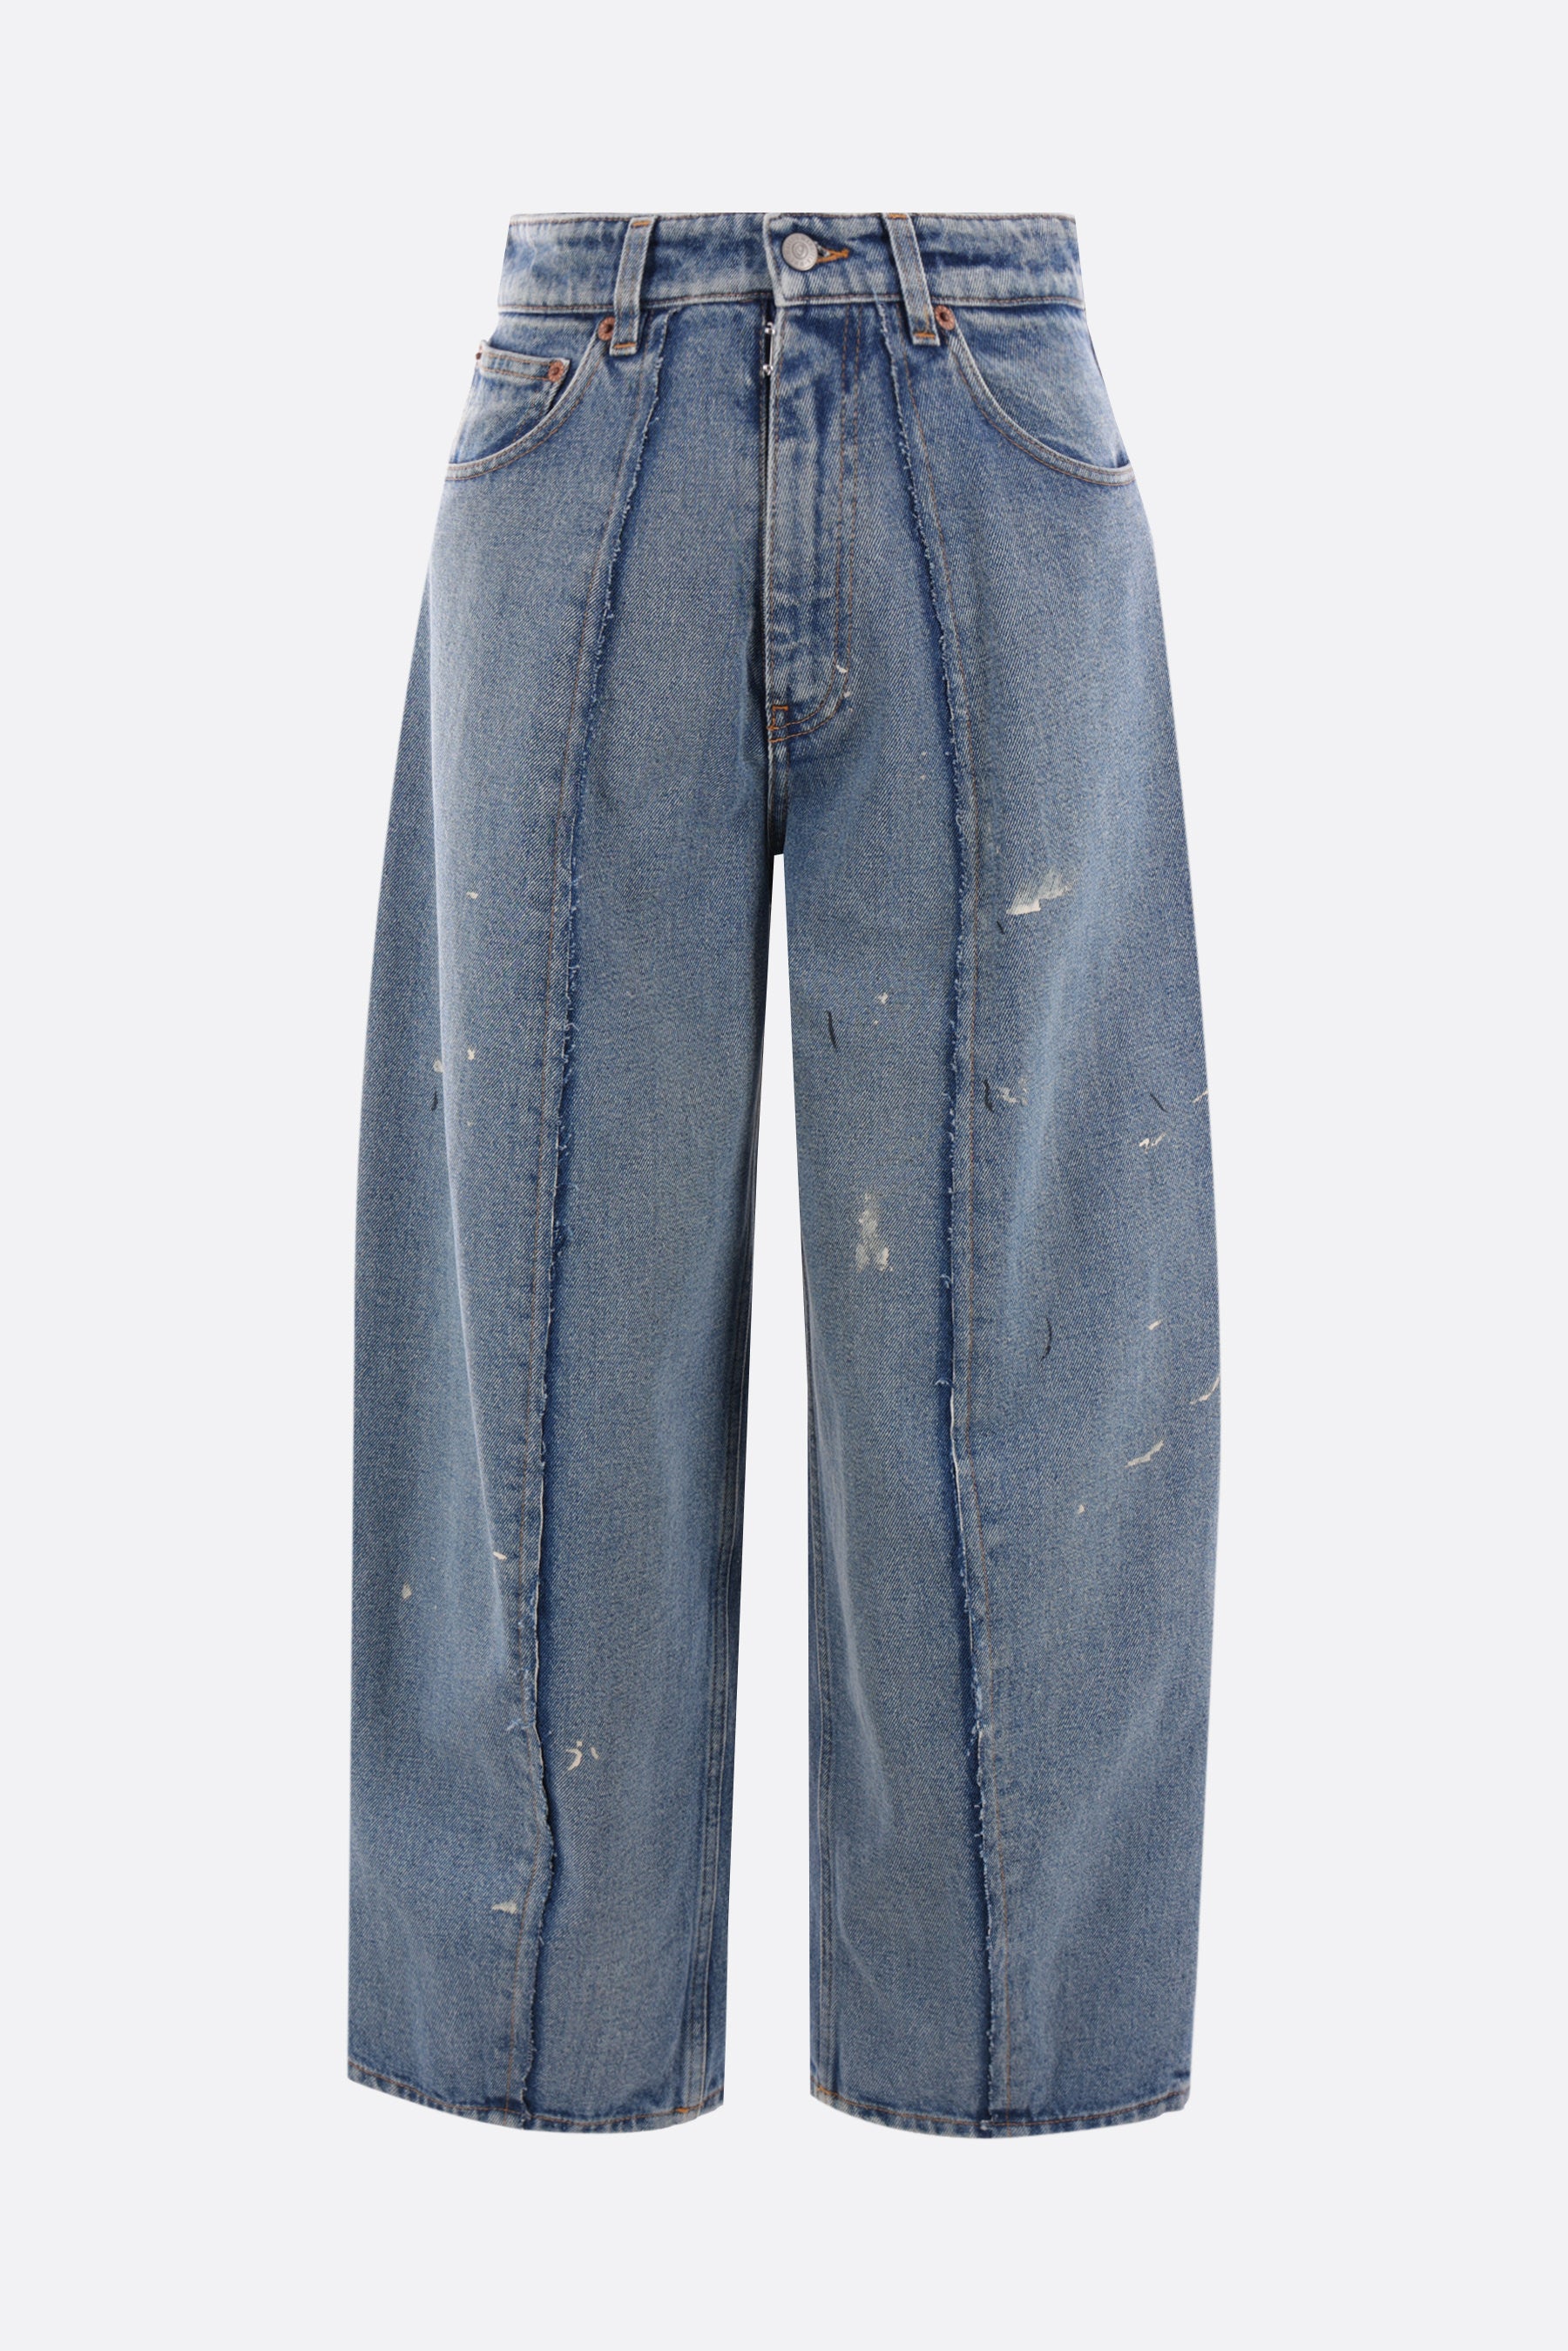 denim cropped oversized jeans with color stains